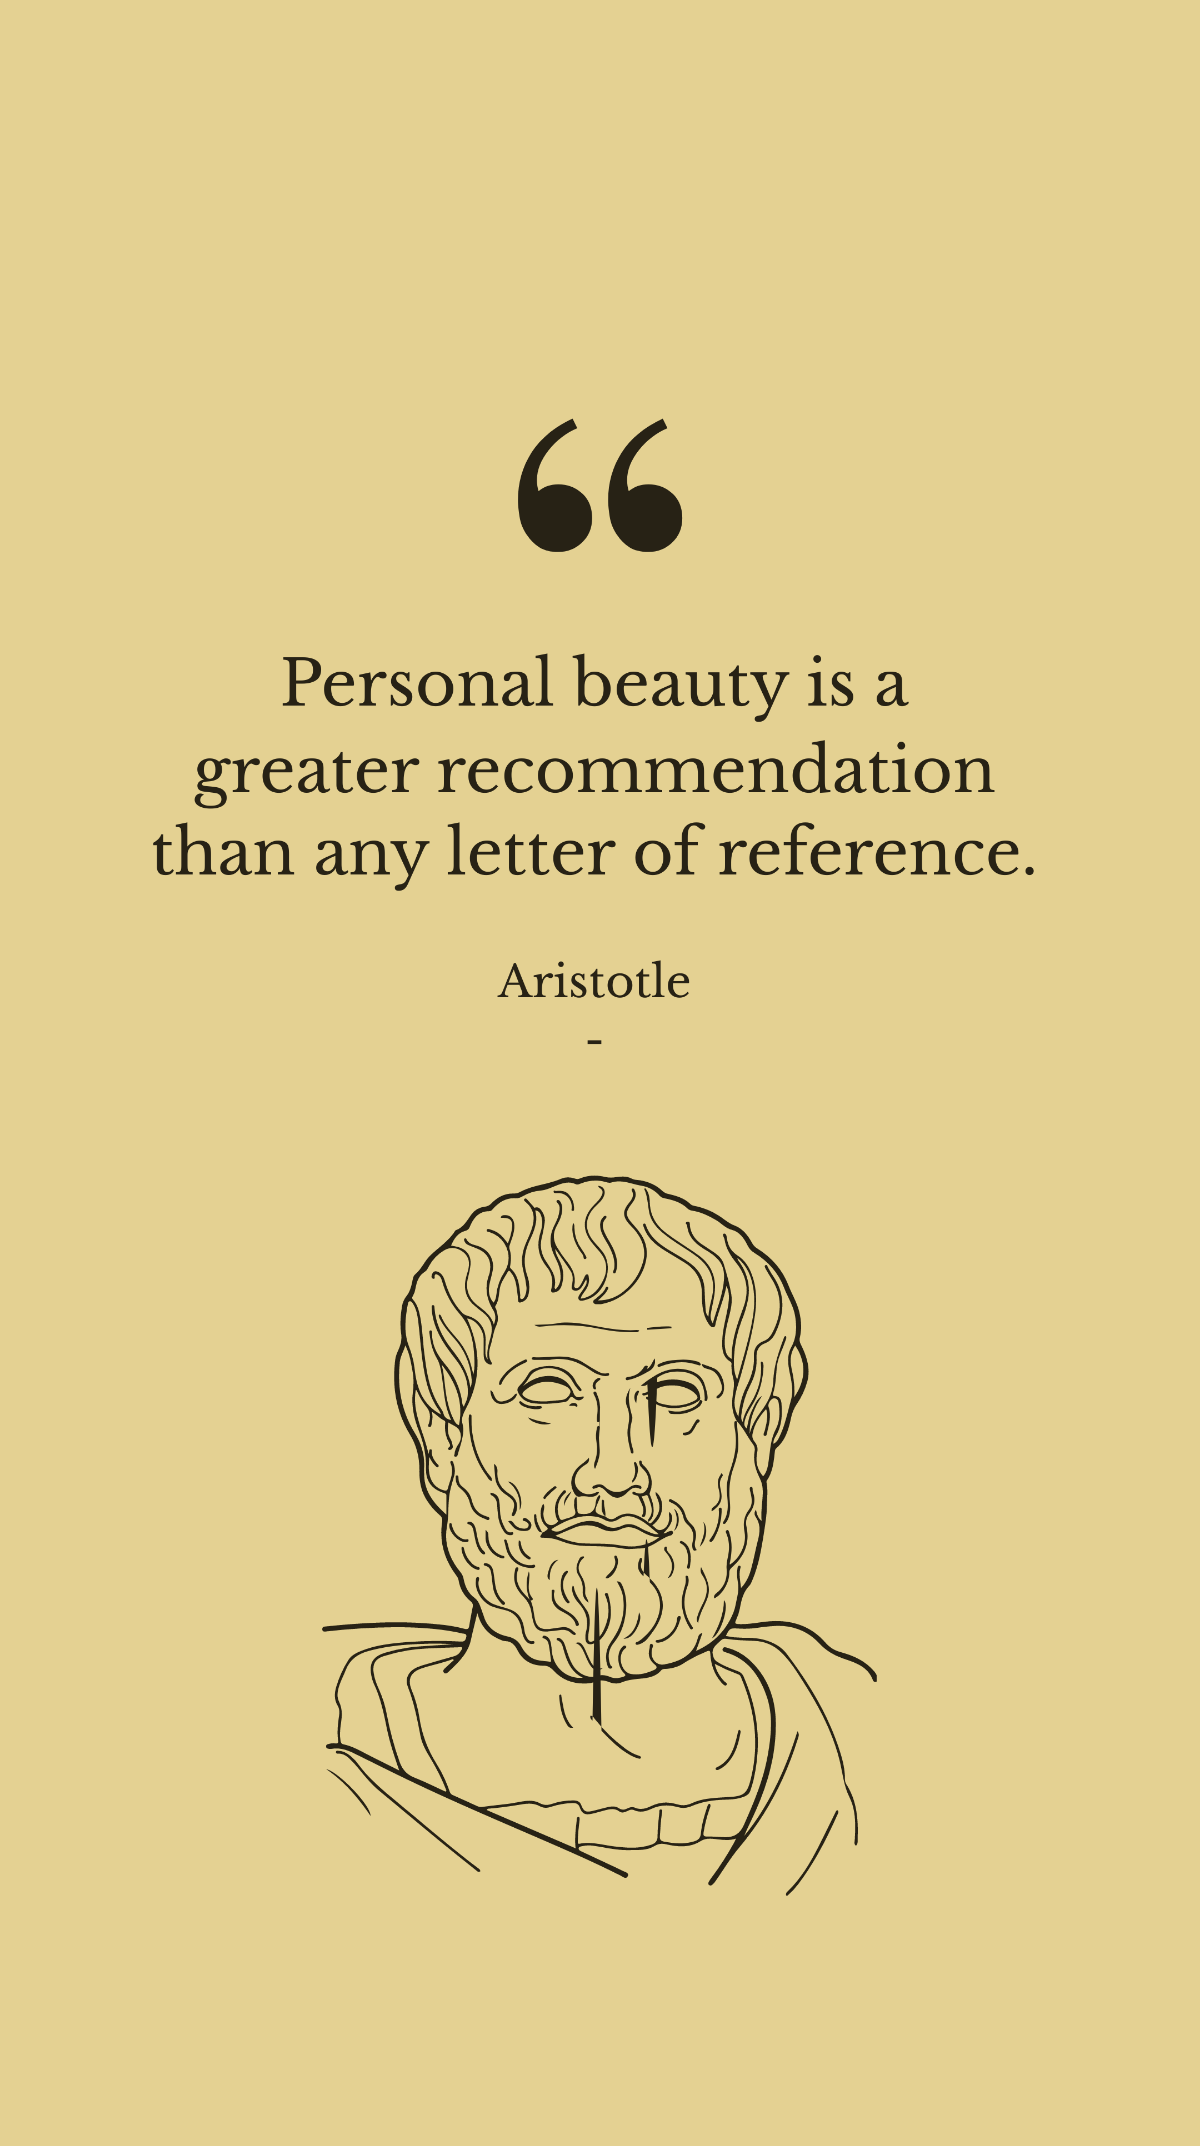 Aristotle - Personal beauty is a greater recommendation than any letter of reference.